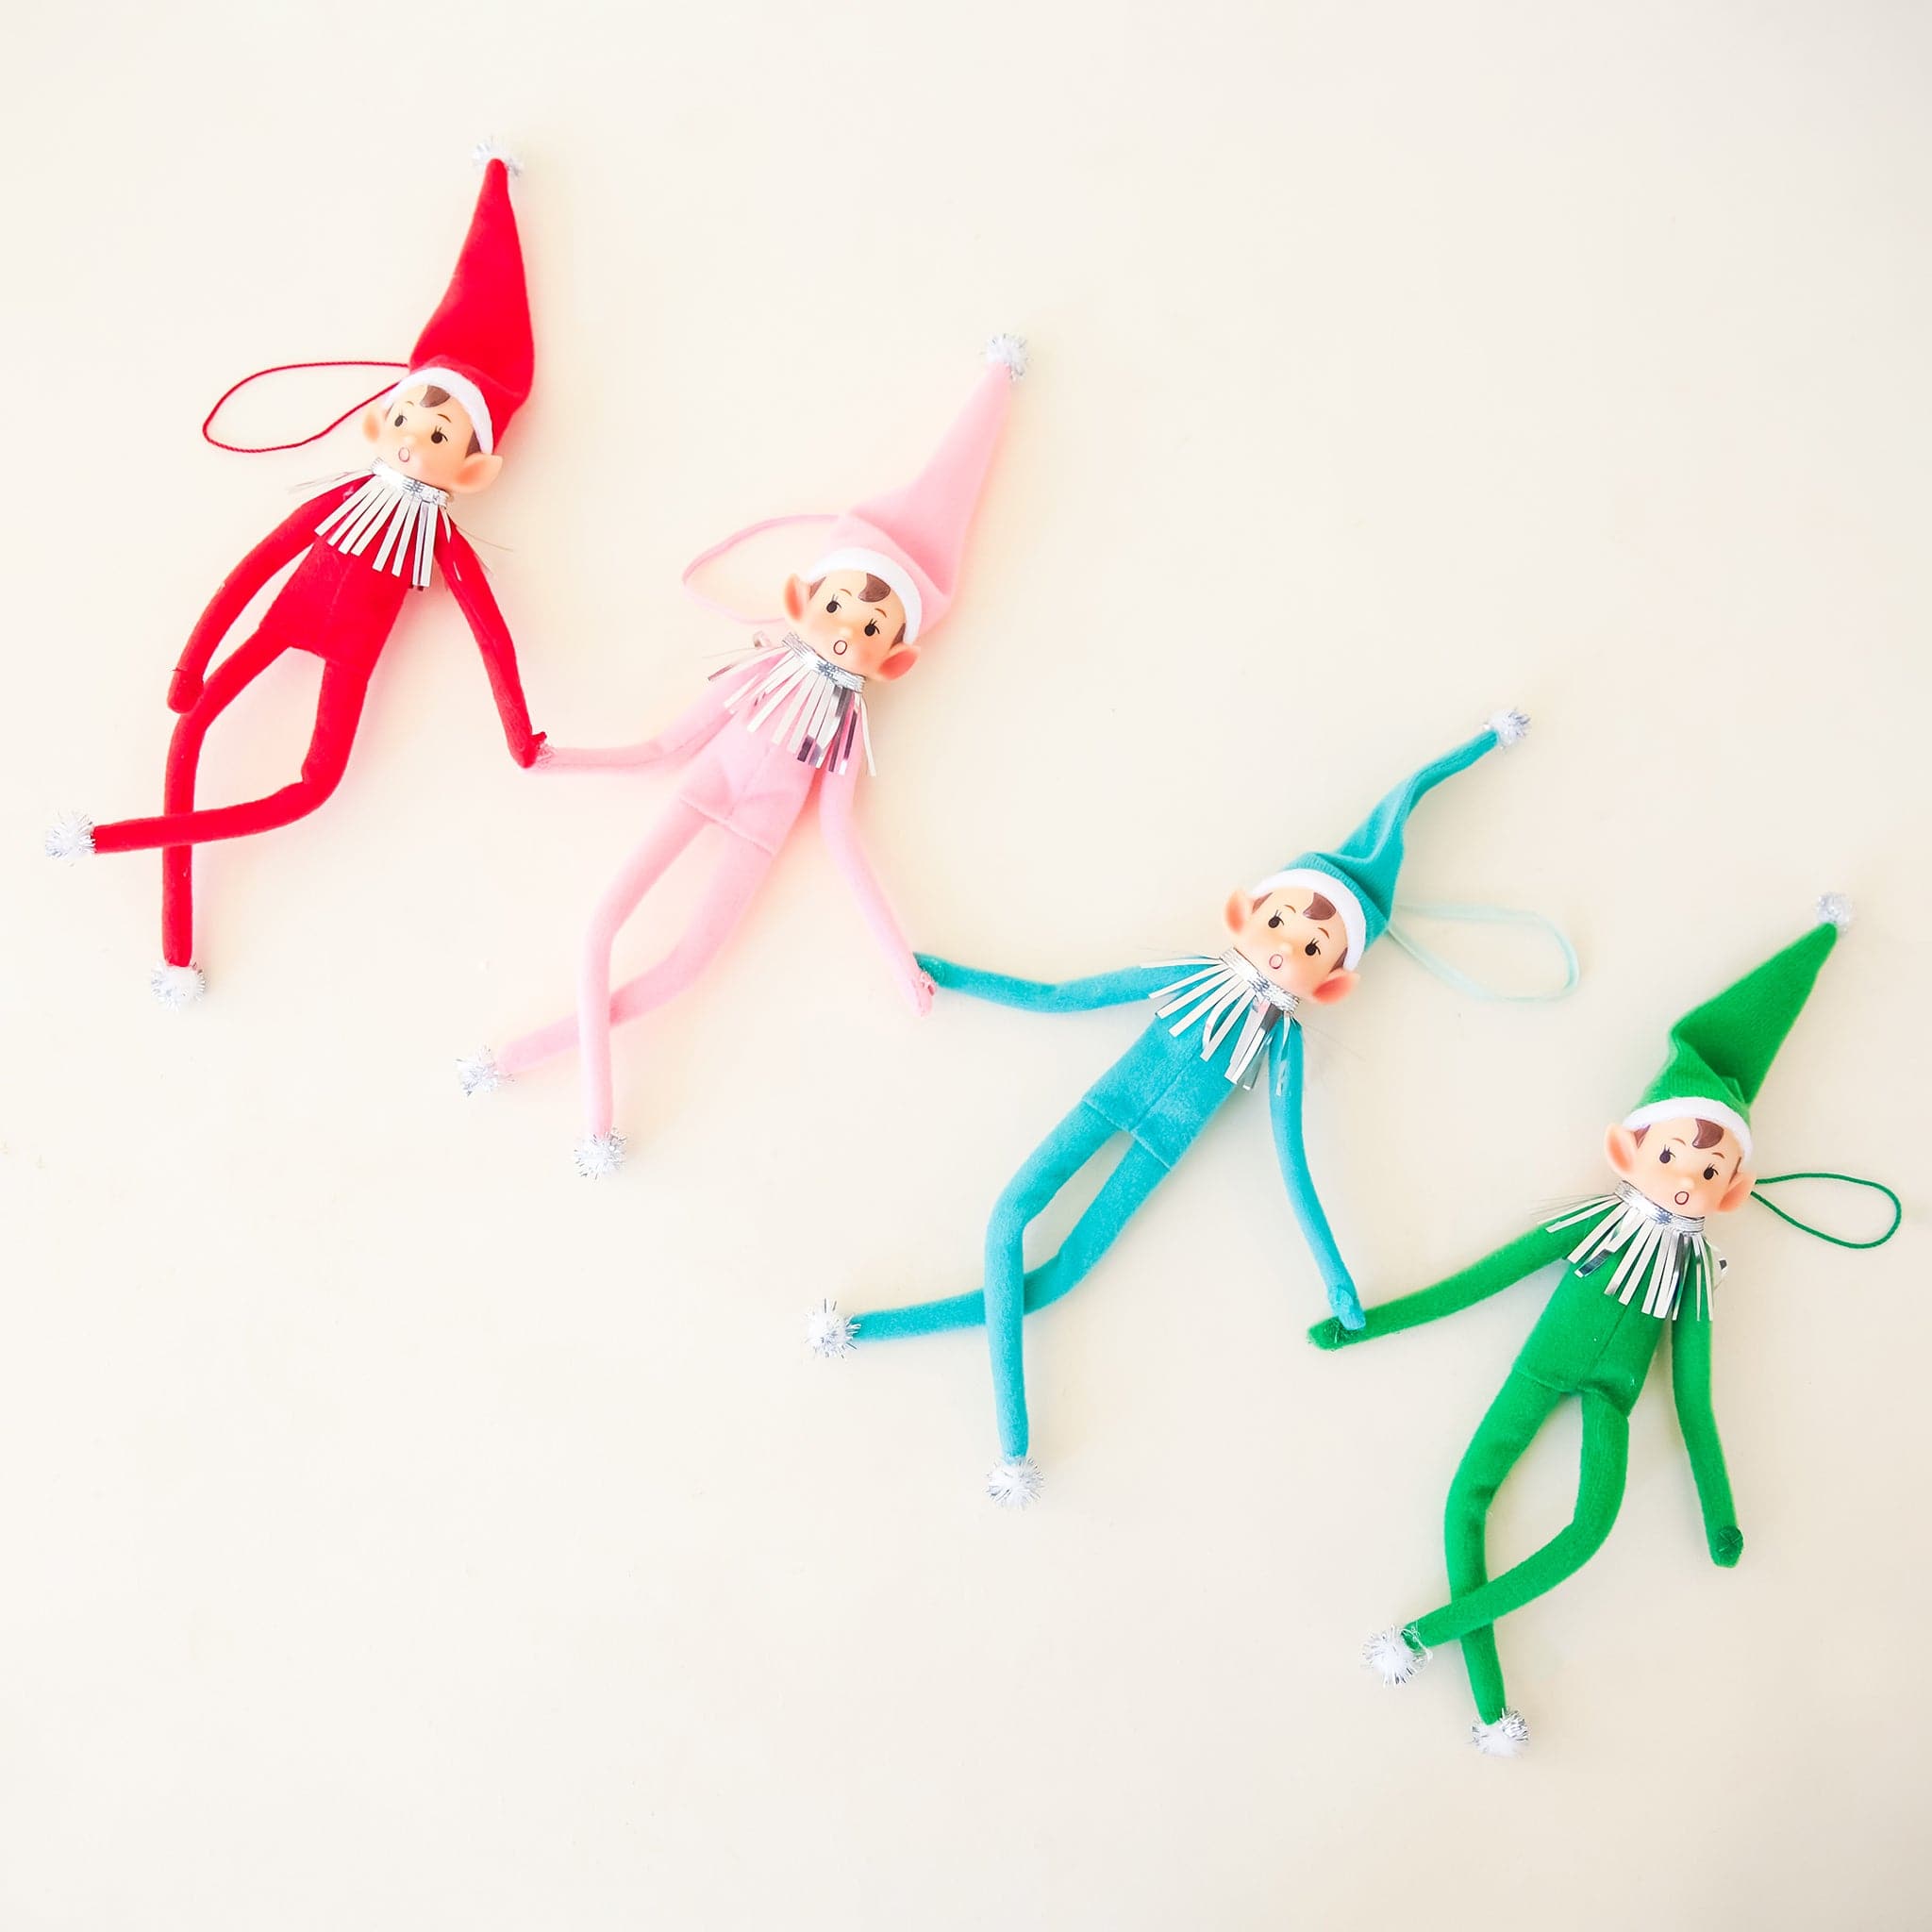 On a cream background is a teal elf ornament with bendy arms and legs and a teal loop for hanging and photographed next to the other three available colors, red, green and pink.